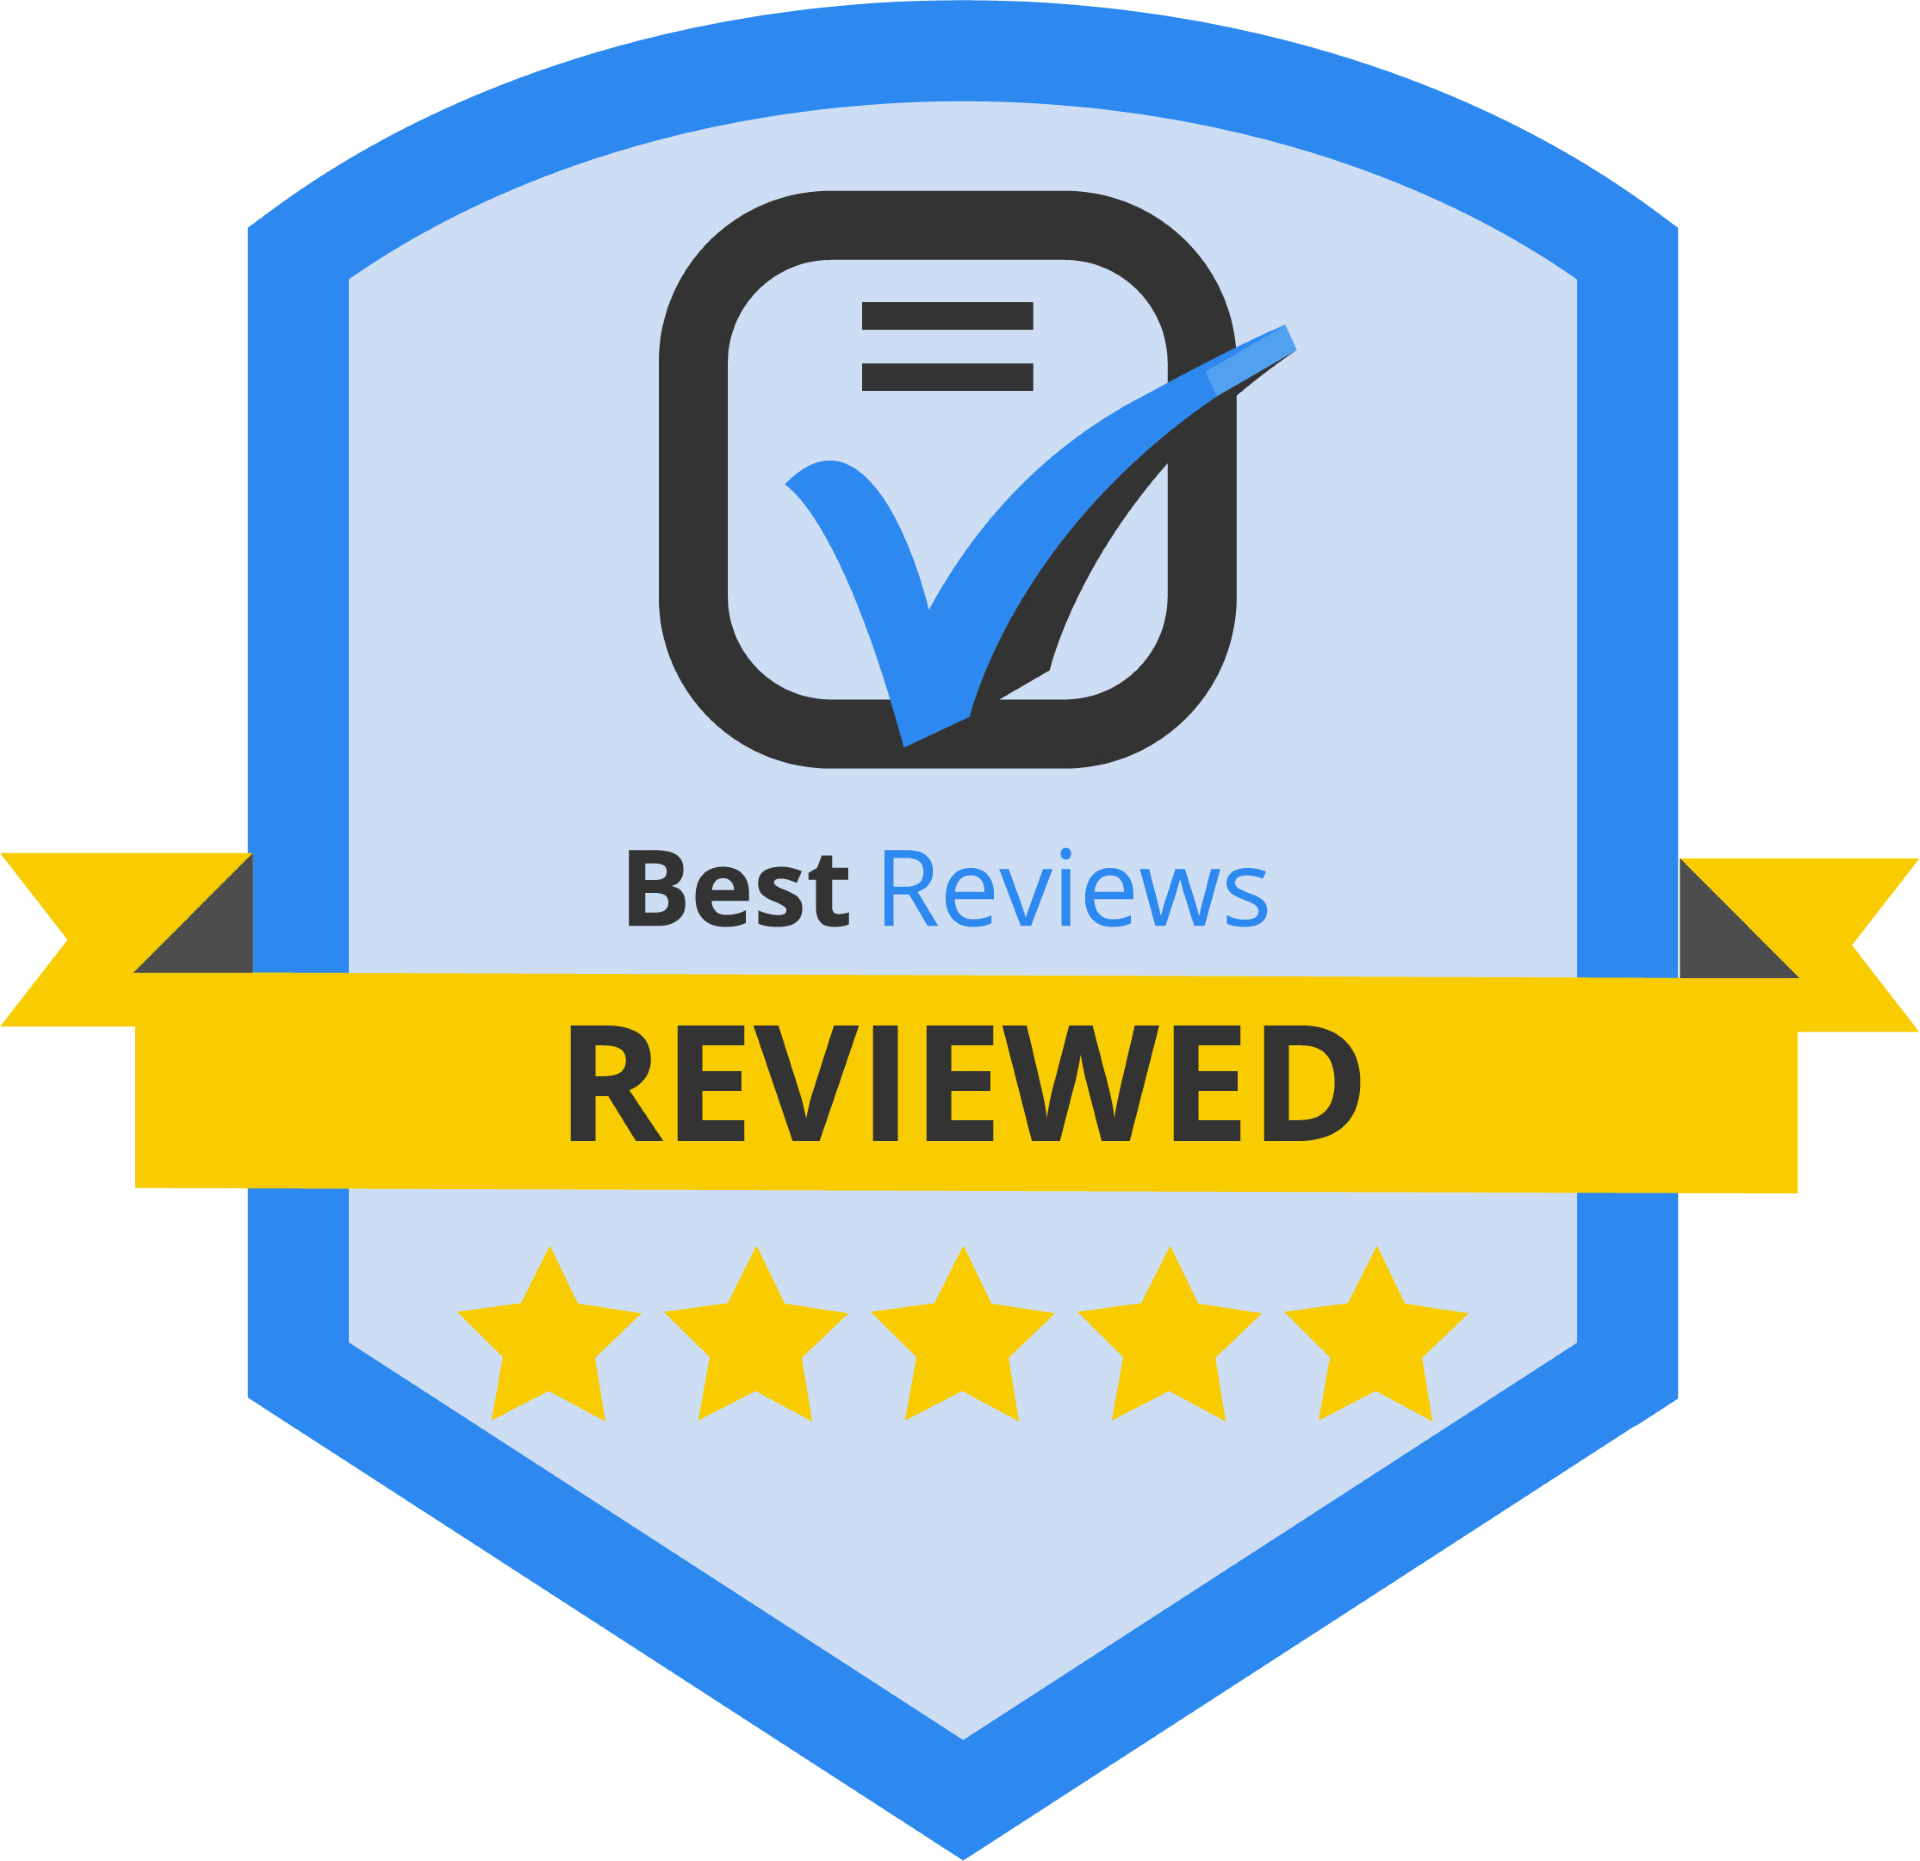 Reviewed and recommended by Clovio